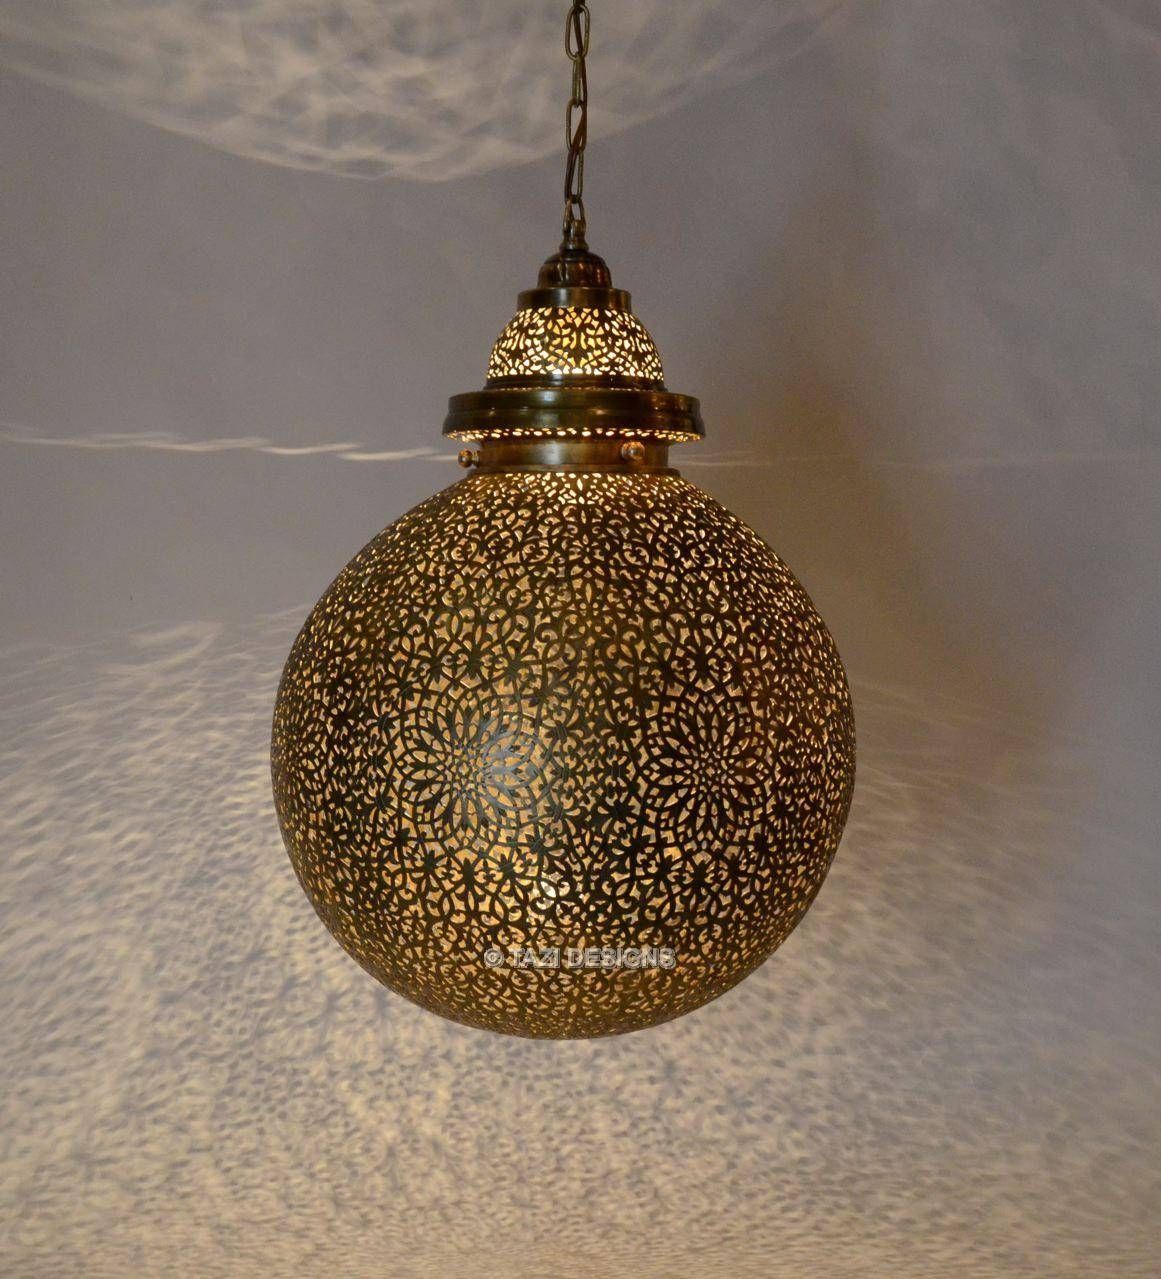 Lamp Moroccan Pendant Light Fixtures That Will Transform Your For Milk Glass Australia Pendant Lights (View 10 of 15)